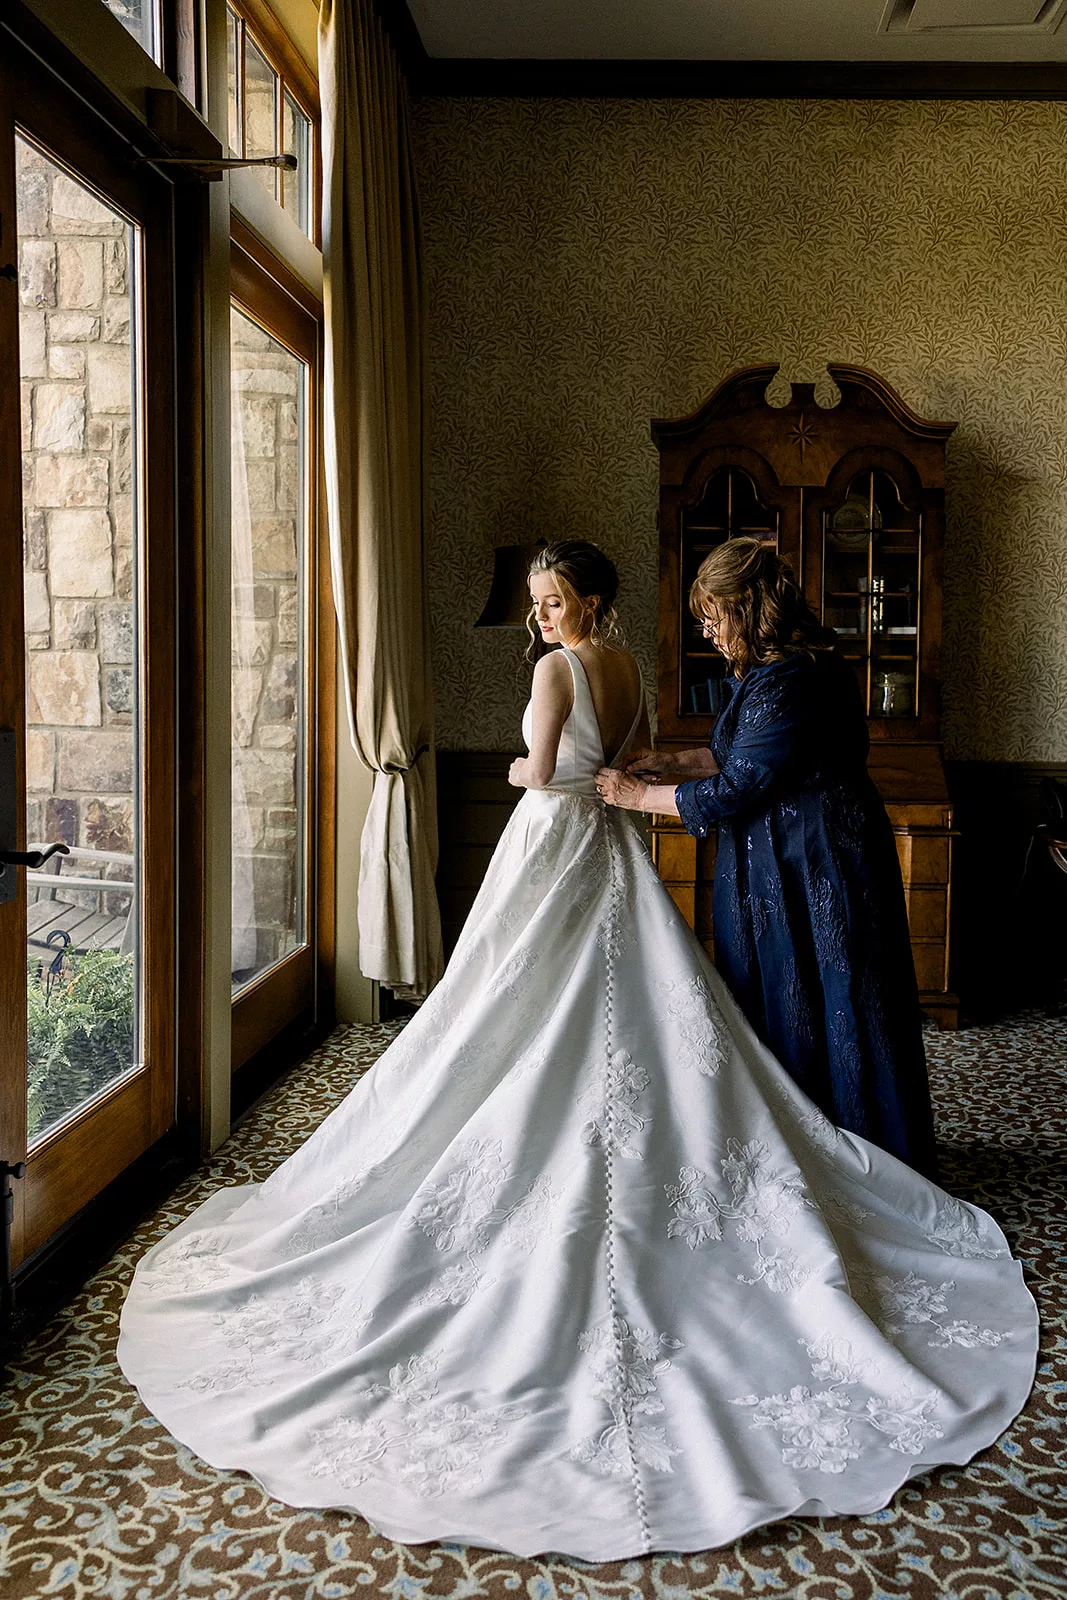 A bride stands in an antique room getting buttoned into her large dress by her mother